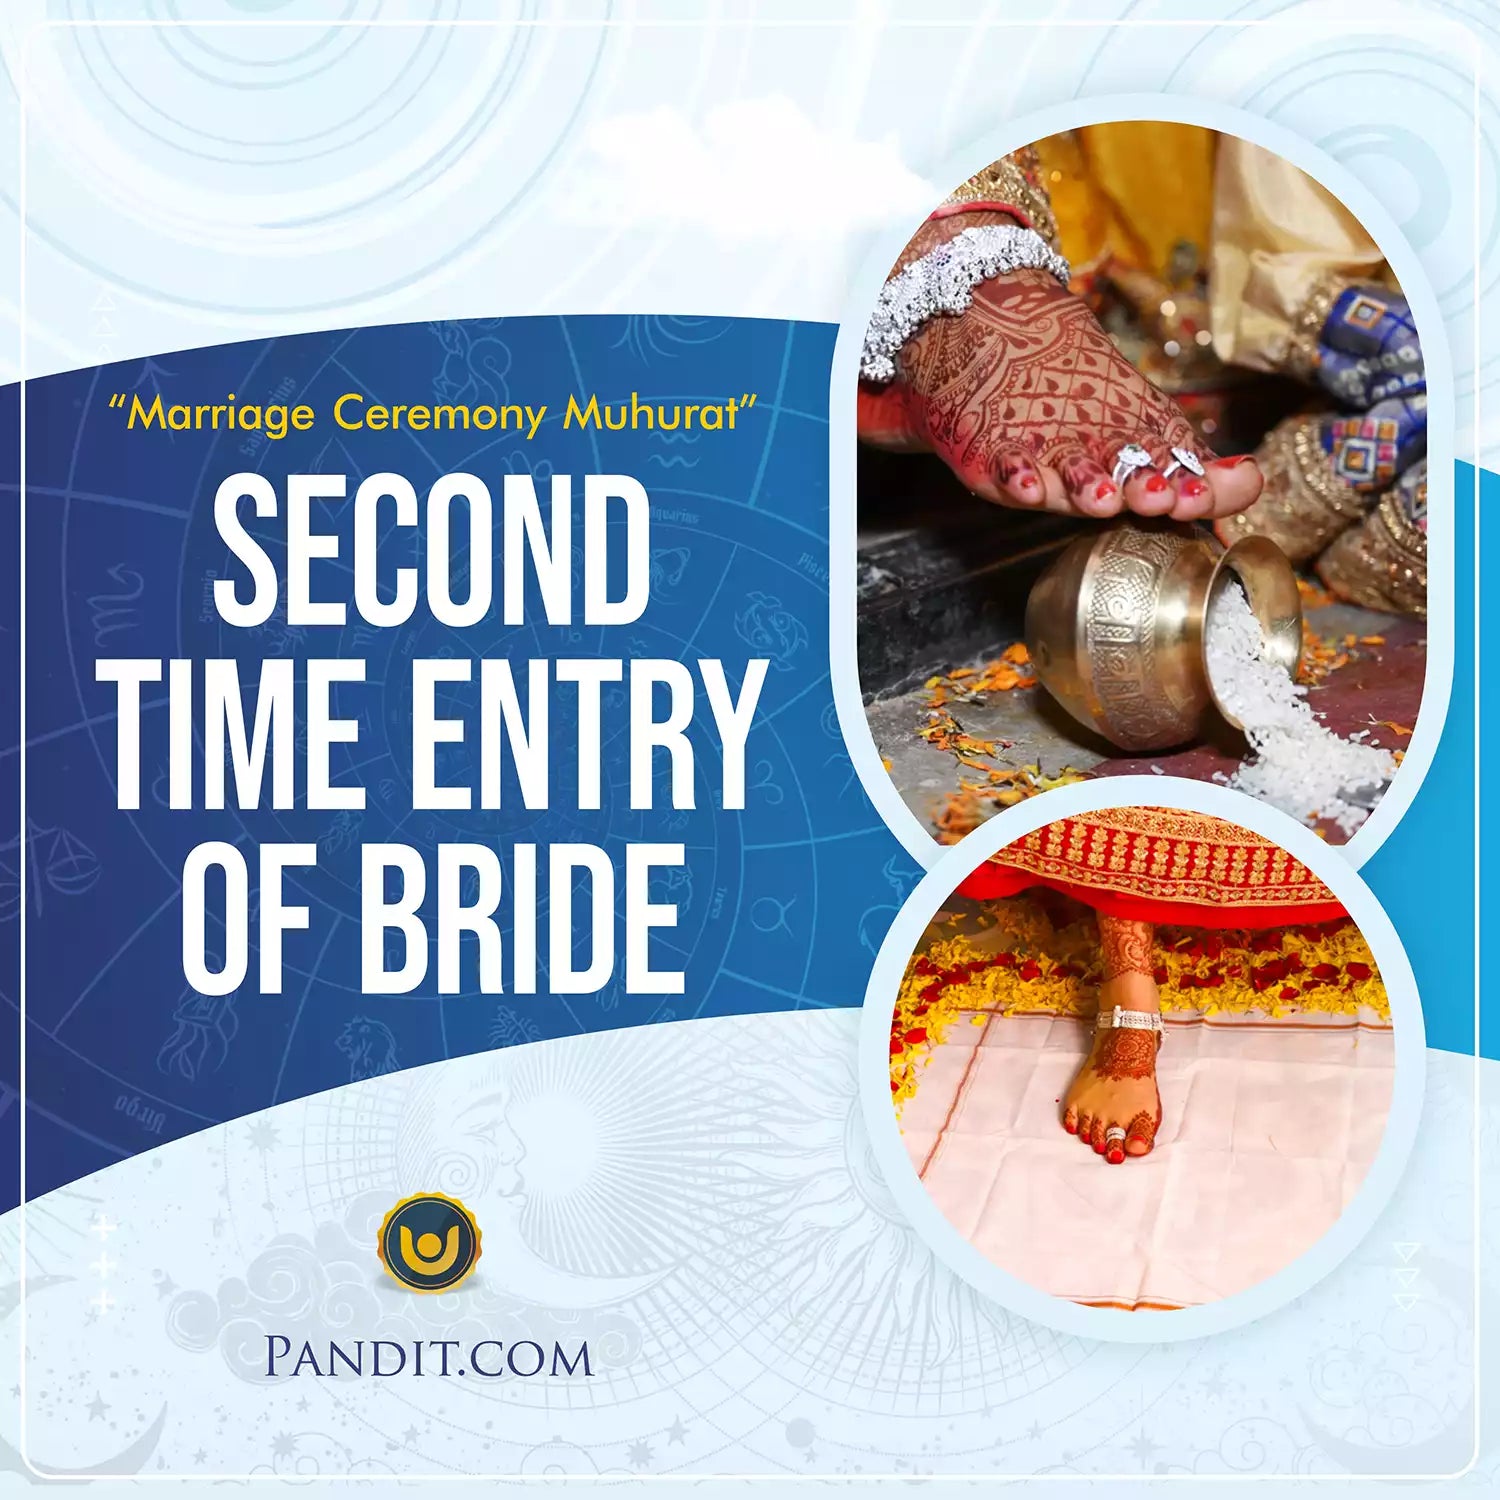 Second Time Entry of Bride